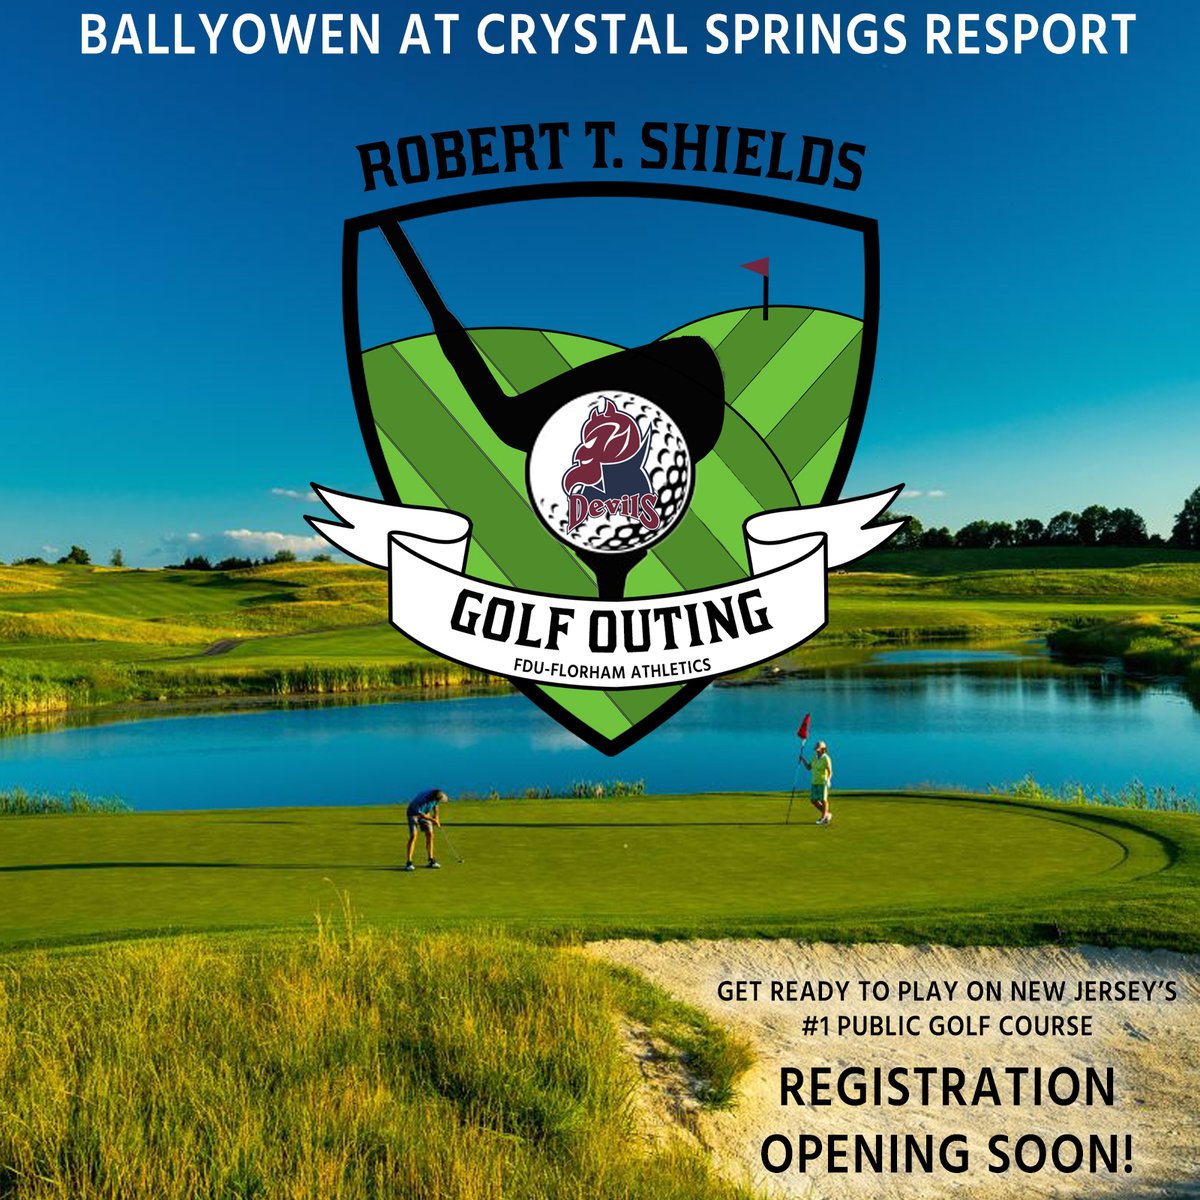 Sunshine means it's golf time! ⛳ The Robert T. Shields Golf Outing has changed location to the Ballyowen course at @CrystalSprings! Be on the lookout as registration for the 27th Annual Robert T. Shields Golf Outing will be opening soon! #HornsUp #HeatsRising